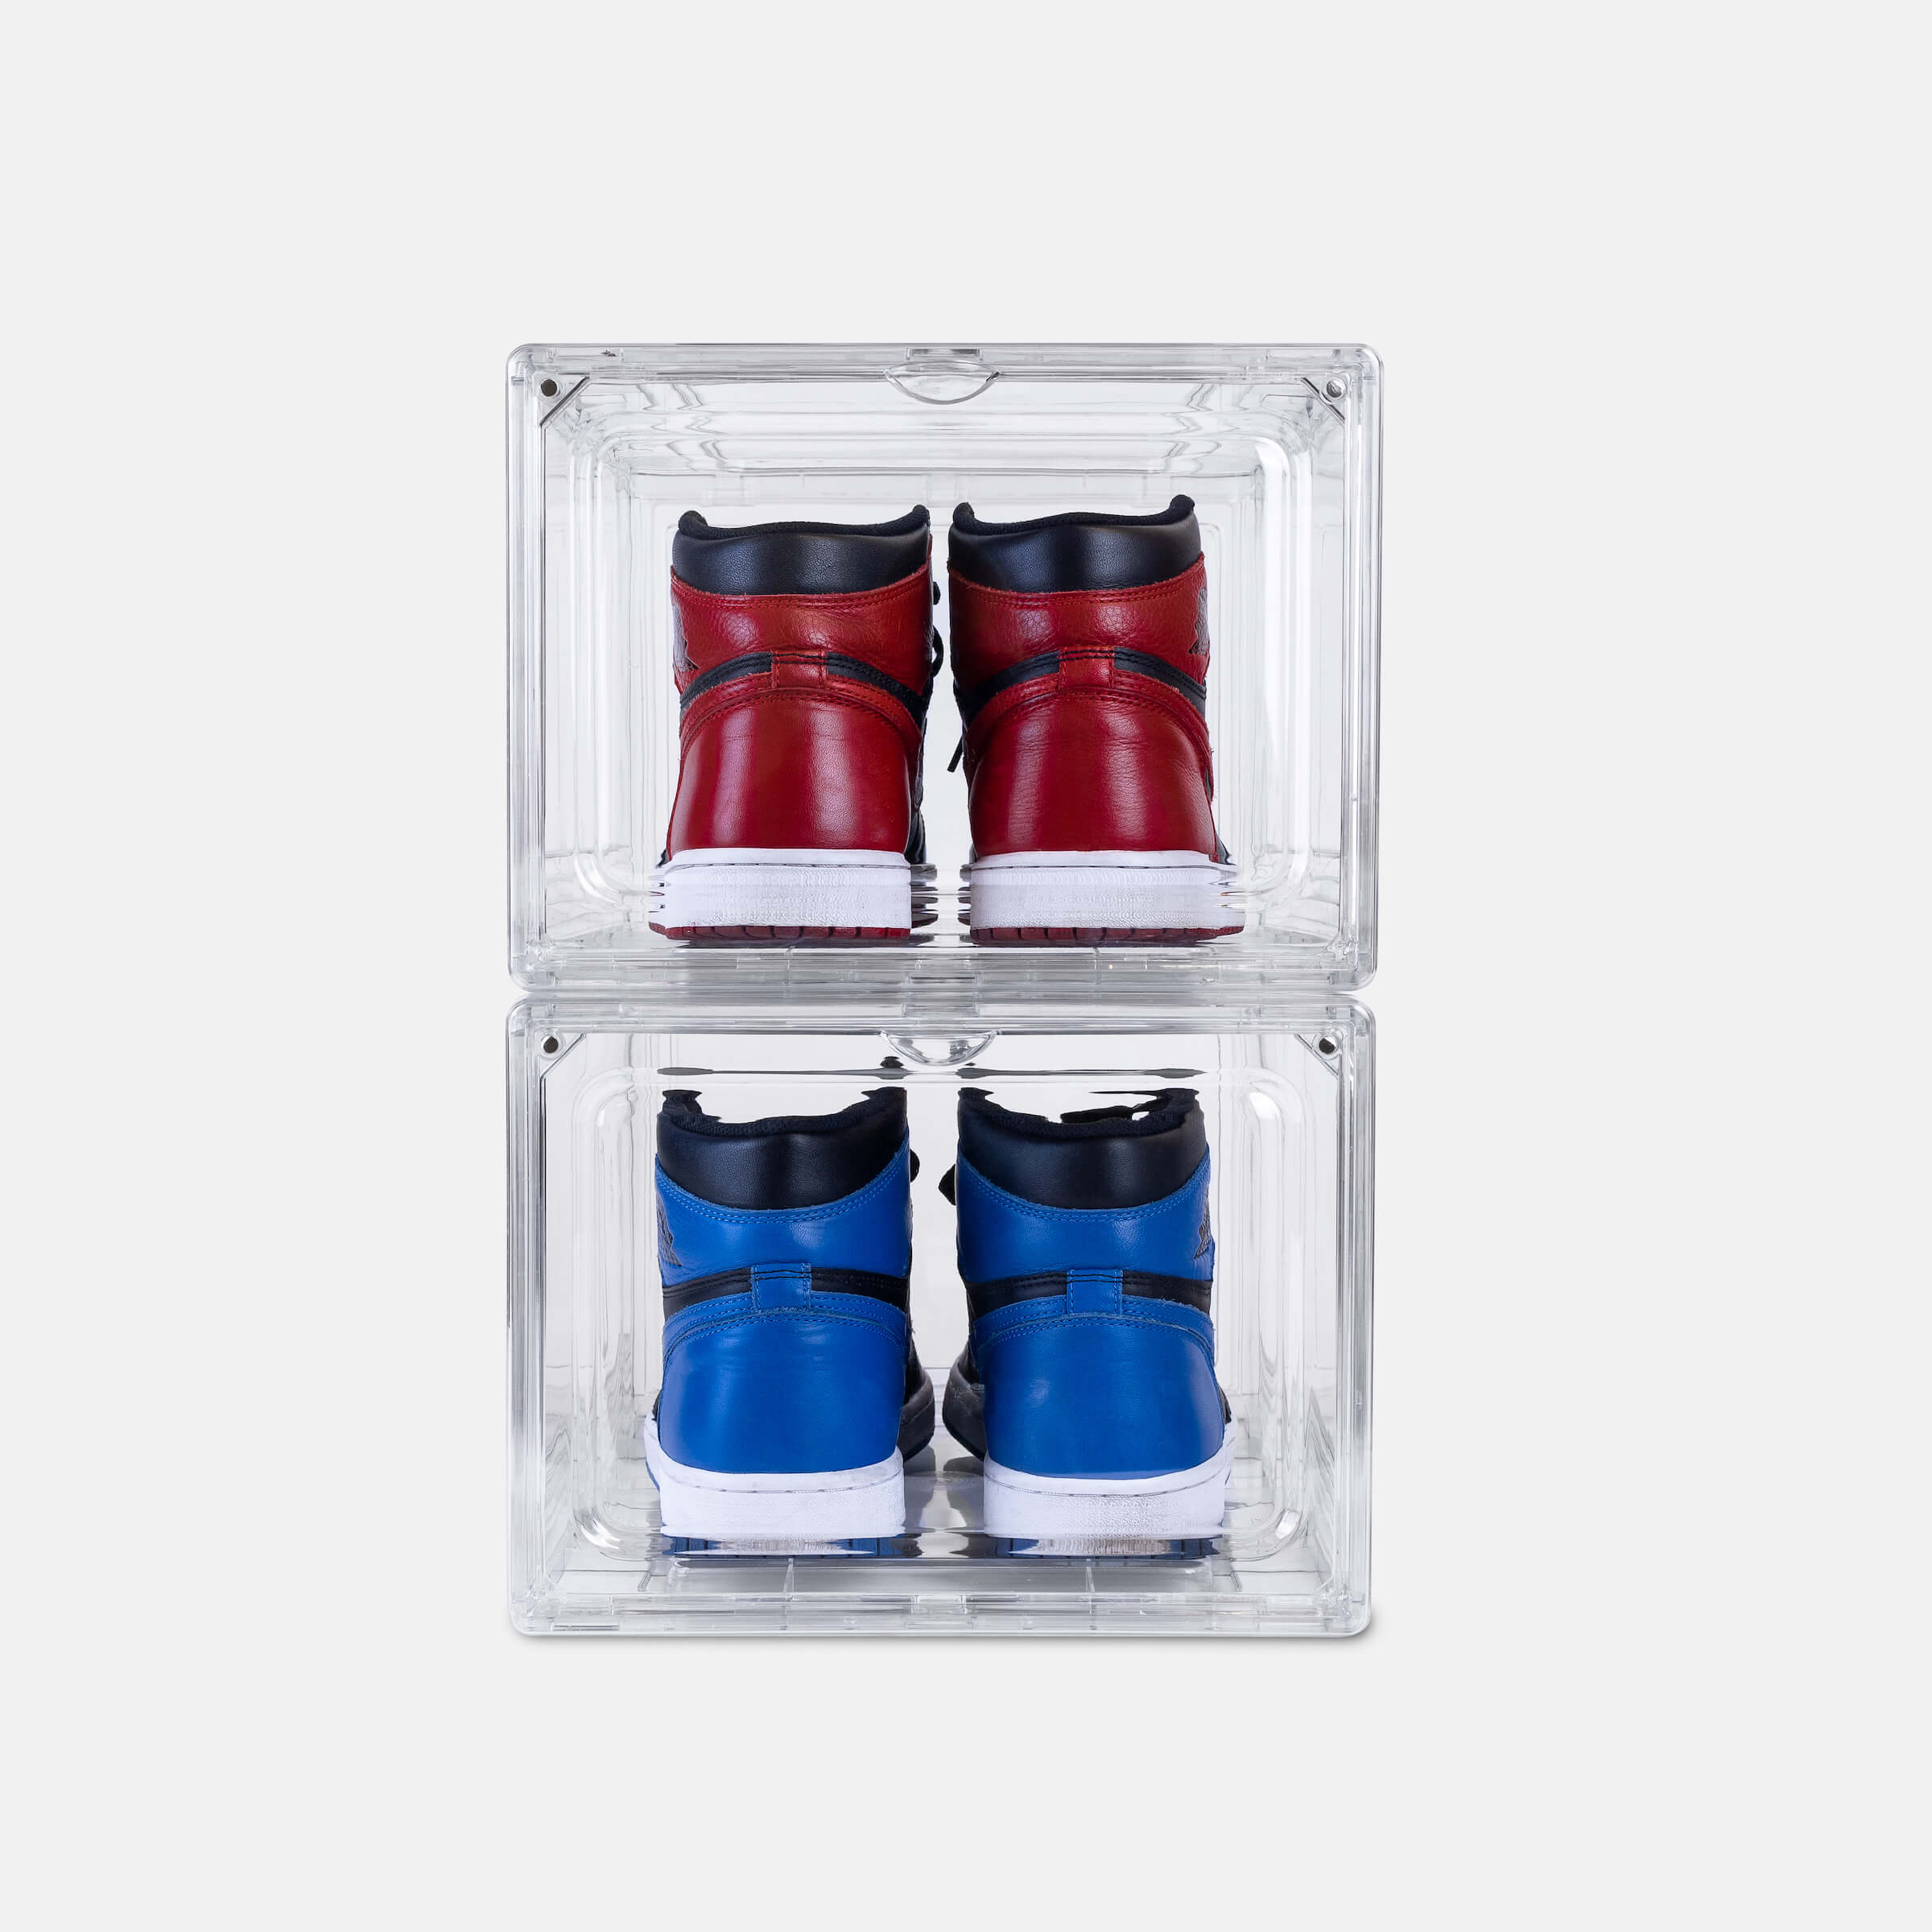 The Perfect Pro Shoe Display Box for Organized and Stylish Storage